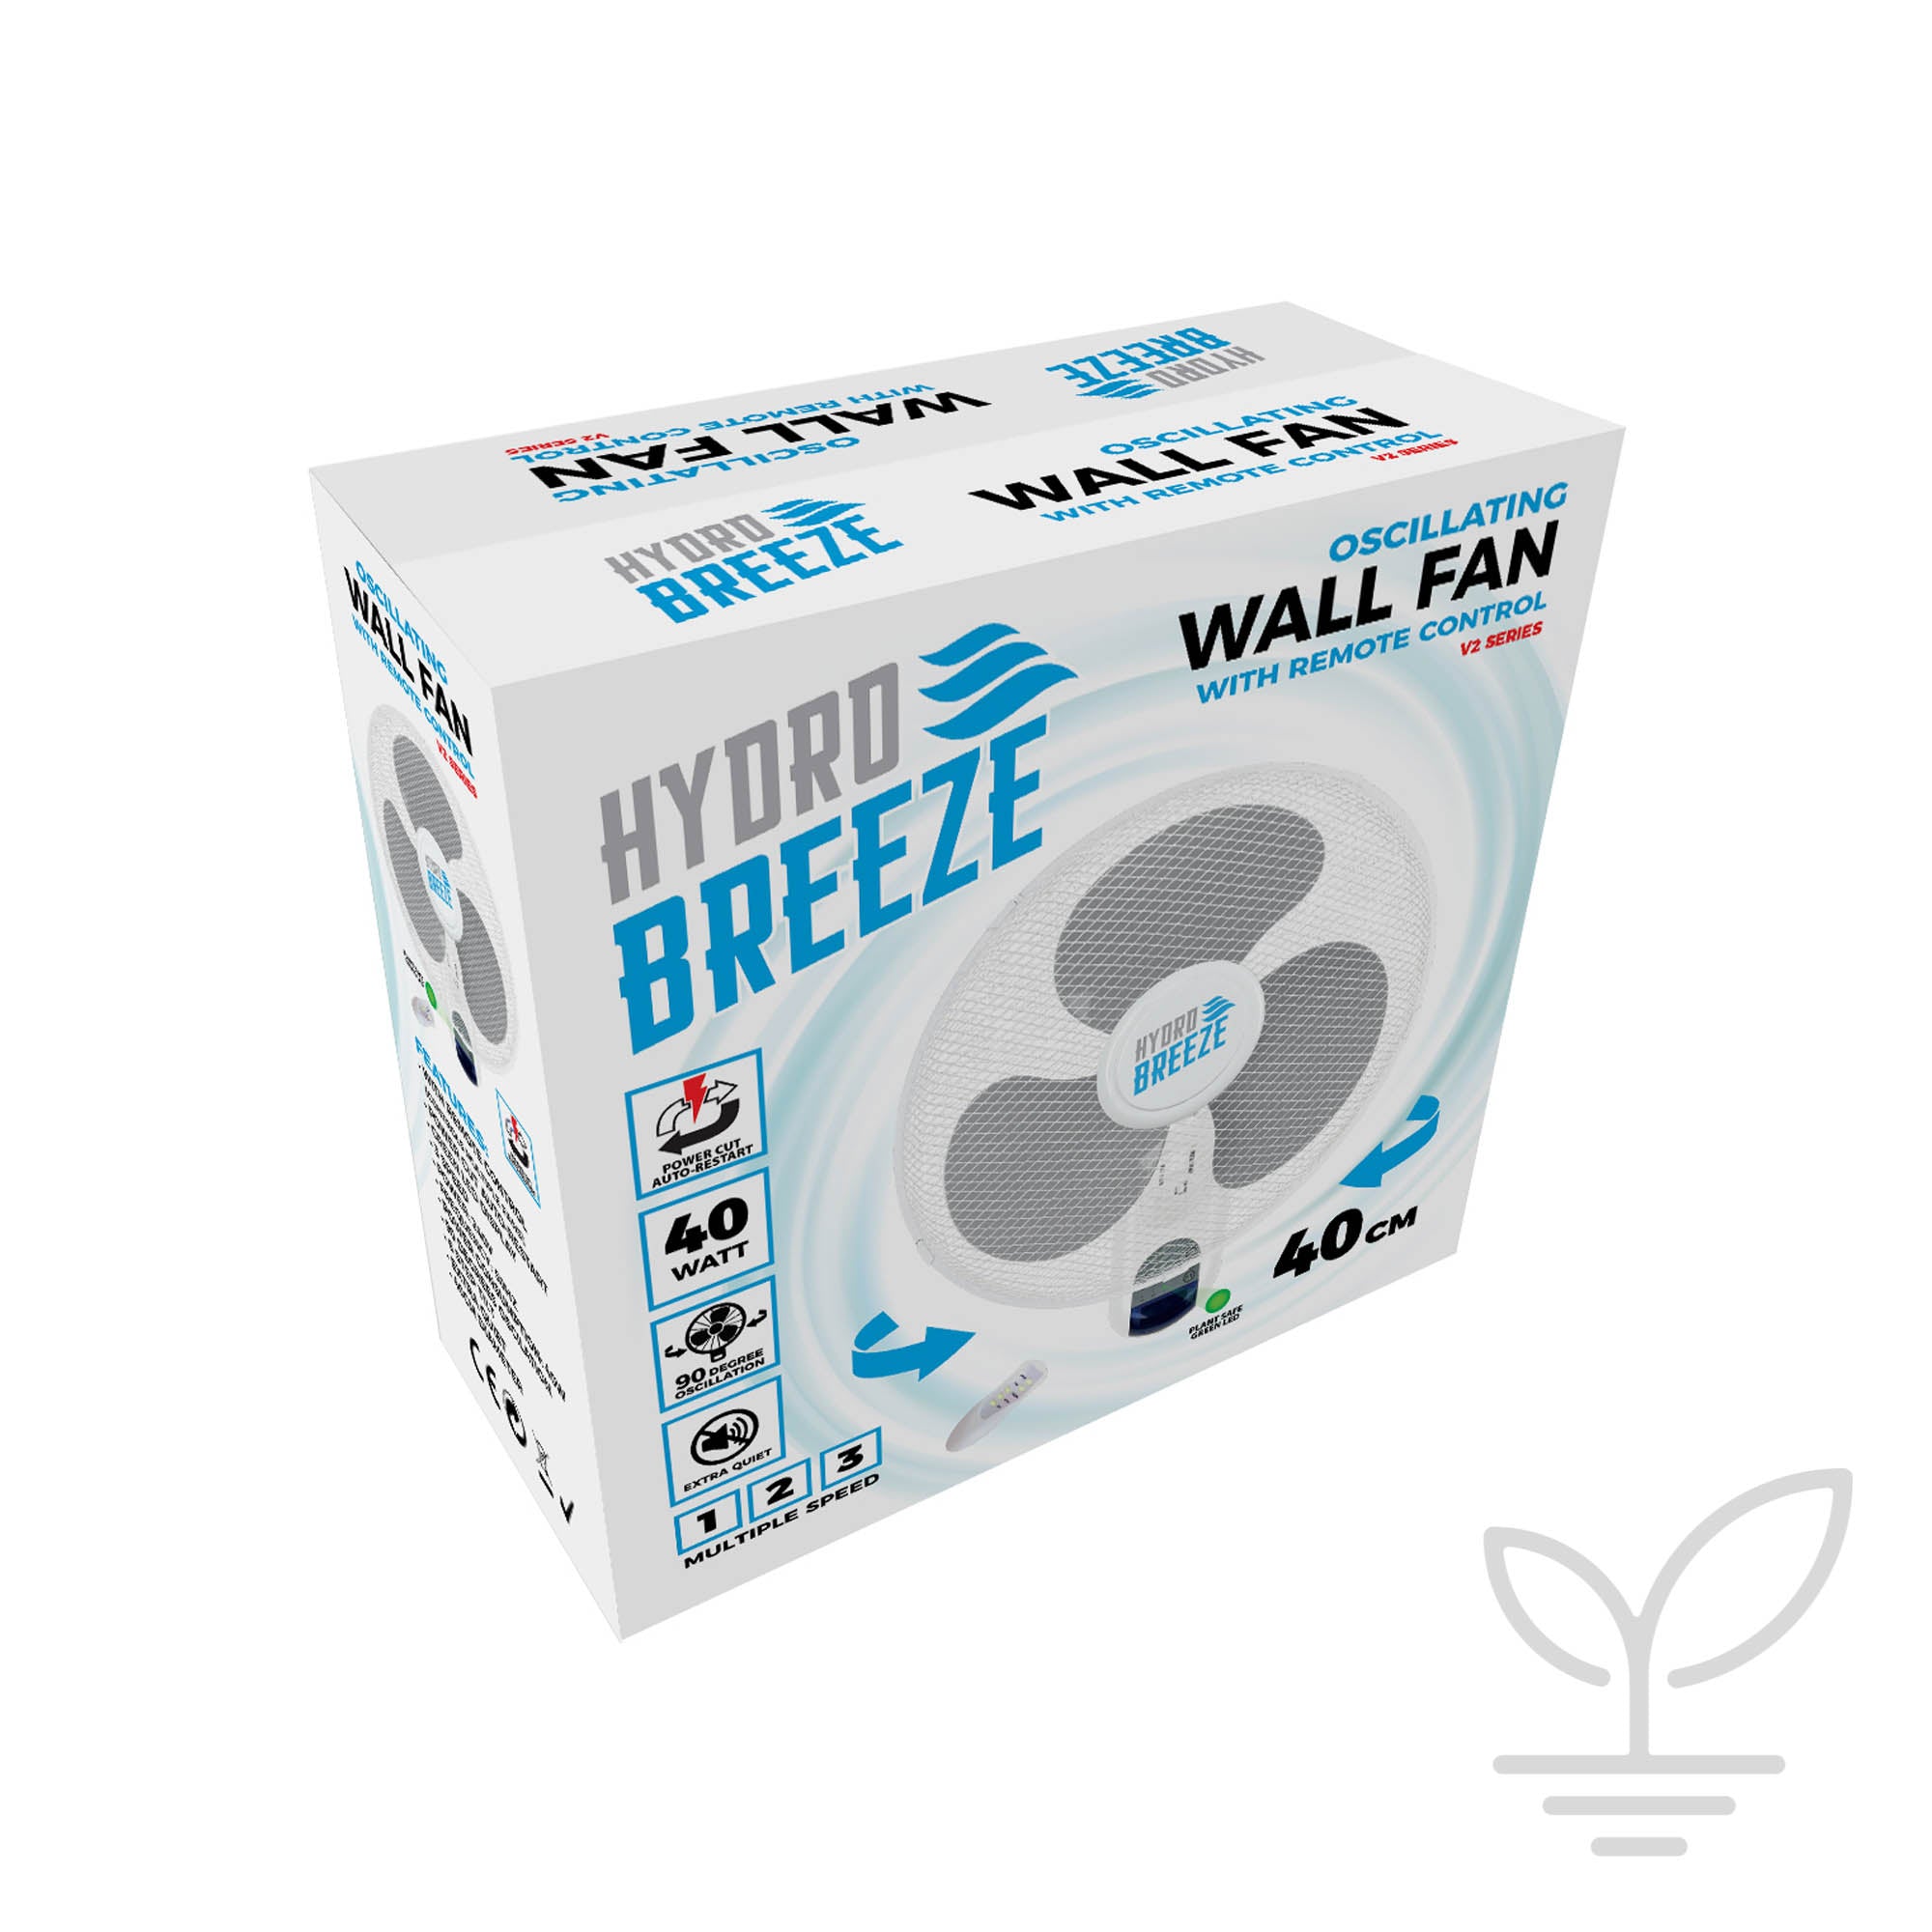 Hydro Breeze Wall Fan with Controller